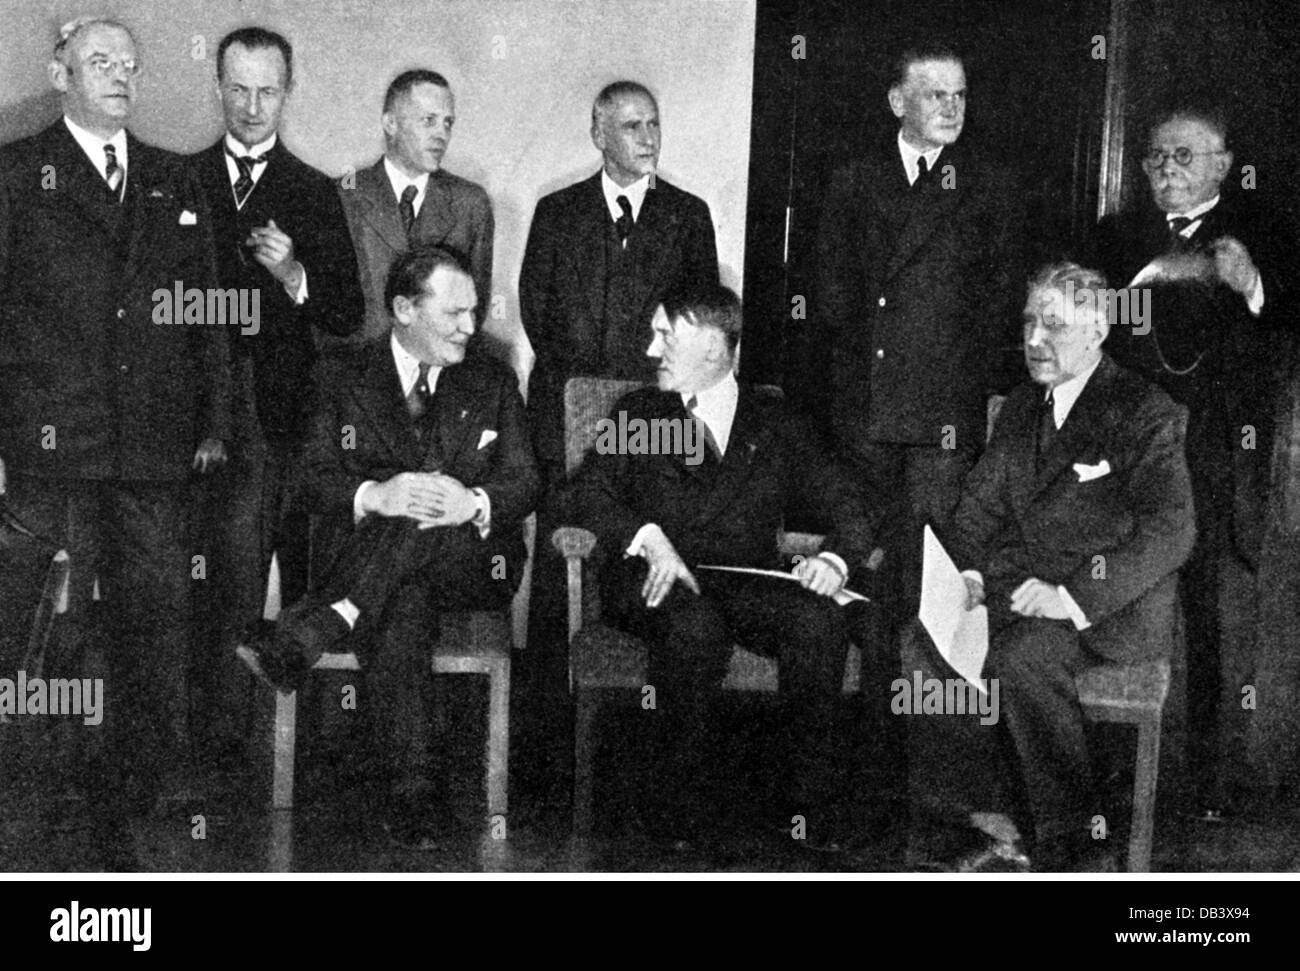 Hitler, Adolf, 20.4.1889 - 30.4.1945, German politician (NSDAP), Chancellor of the Reich 30.1.1933 - 30.4.1945, with his cabinet at day of the formation of a government, Chancellery of the Reich, Berlin, 30.1.1933, President of Reichstag Hermann Goering, vice chancellor Franz von Papen, Minister for Labour Franz Seldte, Reich commissary for the provision of work Guenther Gereke, Minister of Finance Lutz Count Schwerin von Krosigk, Minister of the Interior Wilhelm Frick, Minister of the Armed Forces Werner von Blomberg, Minister for Economic Affairs Alfred Hugen, Stock Photo